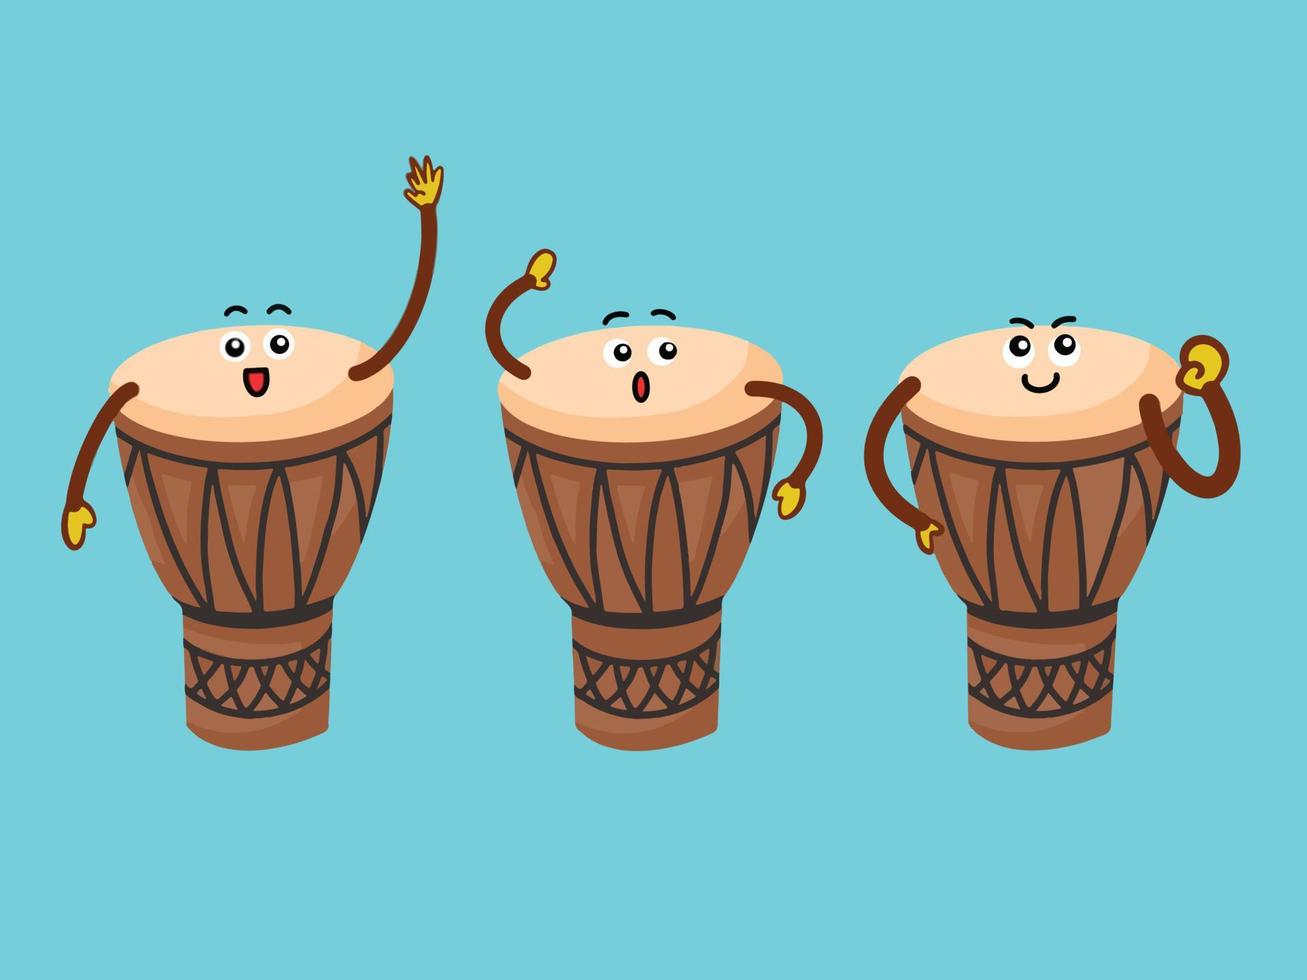 Brown traditional musical drum set character mascot vector illustration collection isolated on blue green background. Cartoon comic vector art with simple and flat art style.